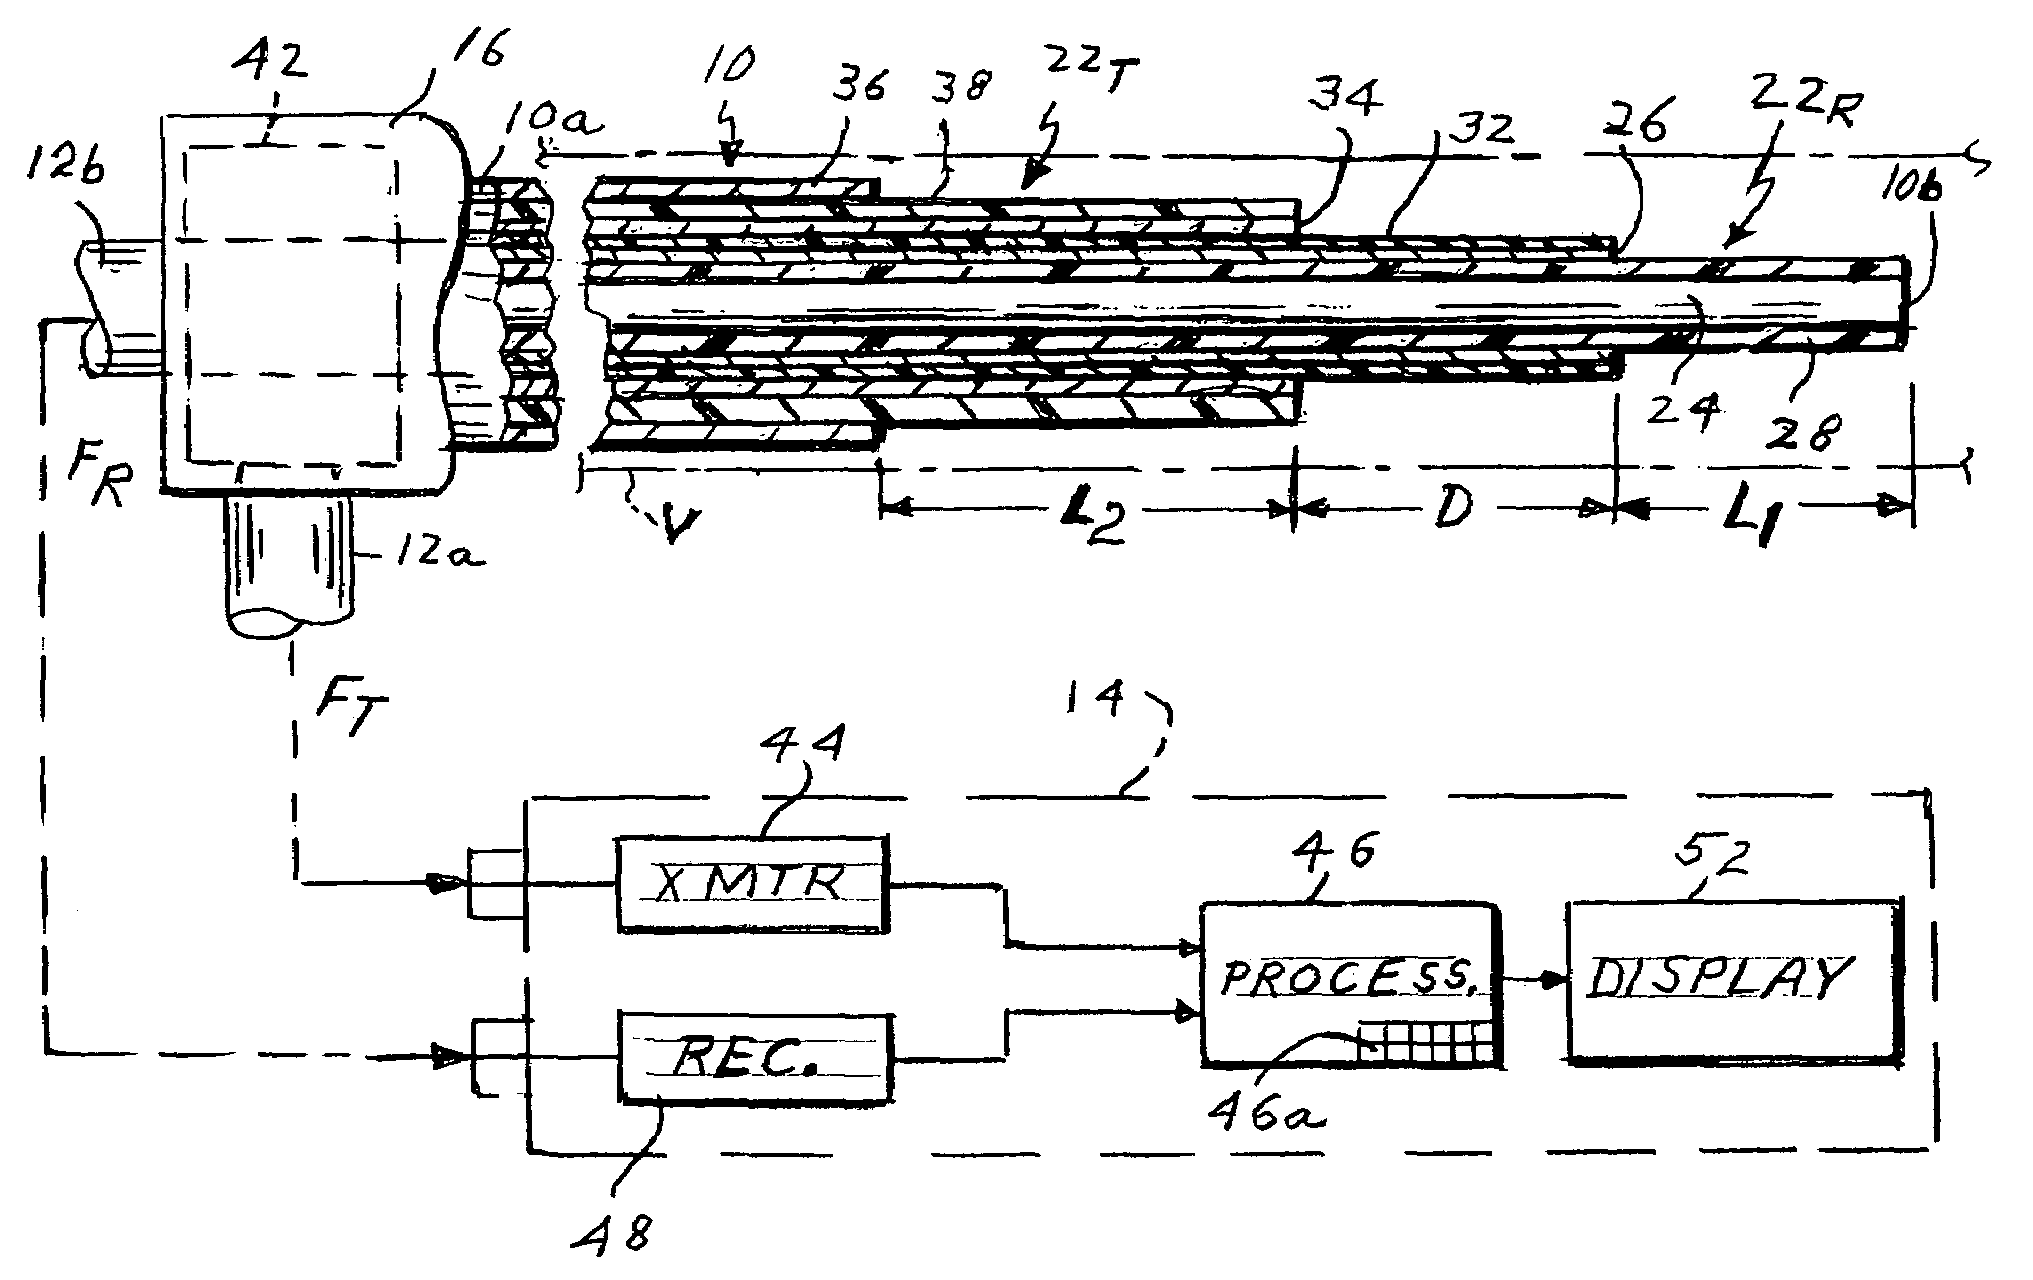 Apparatus for measuring intravascular blood flow